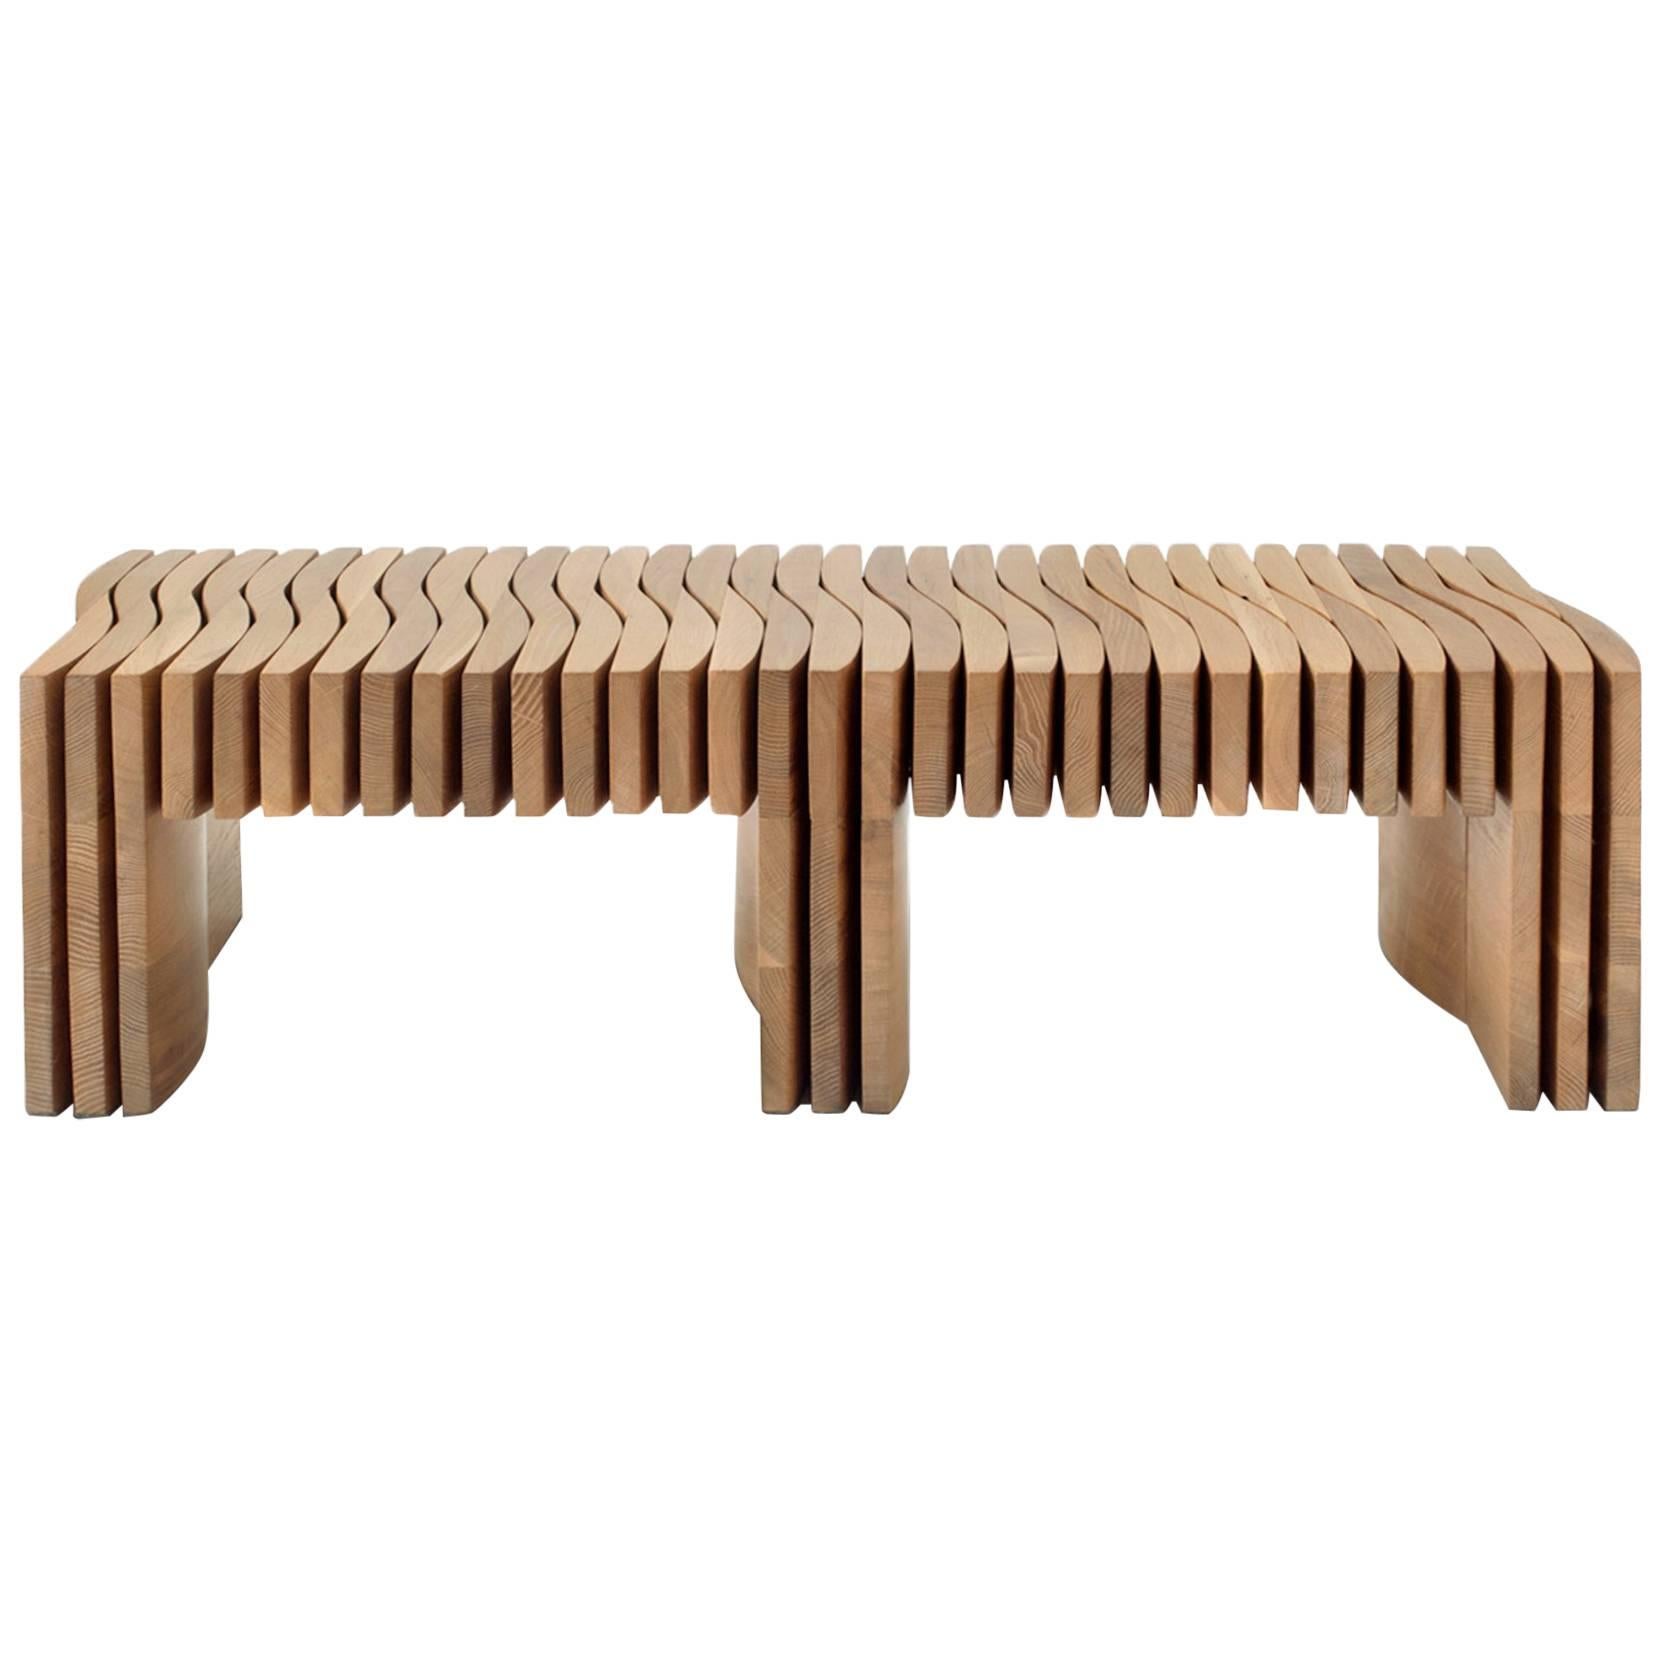 The synthesis bench emphasizes light and shadow through its seamless composition of 136 individually cut and hand finished pieces of solid hardwood. No joints or hardware are exposed, giving its construction an air of mystery. It is cleverly